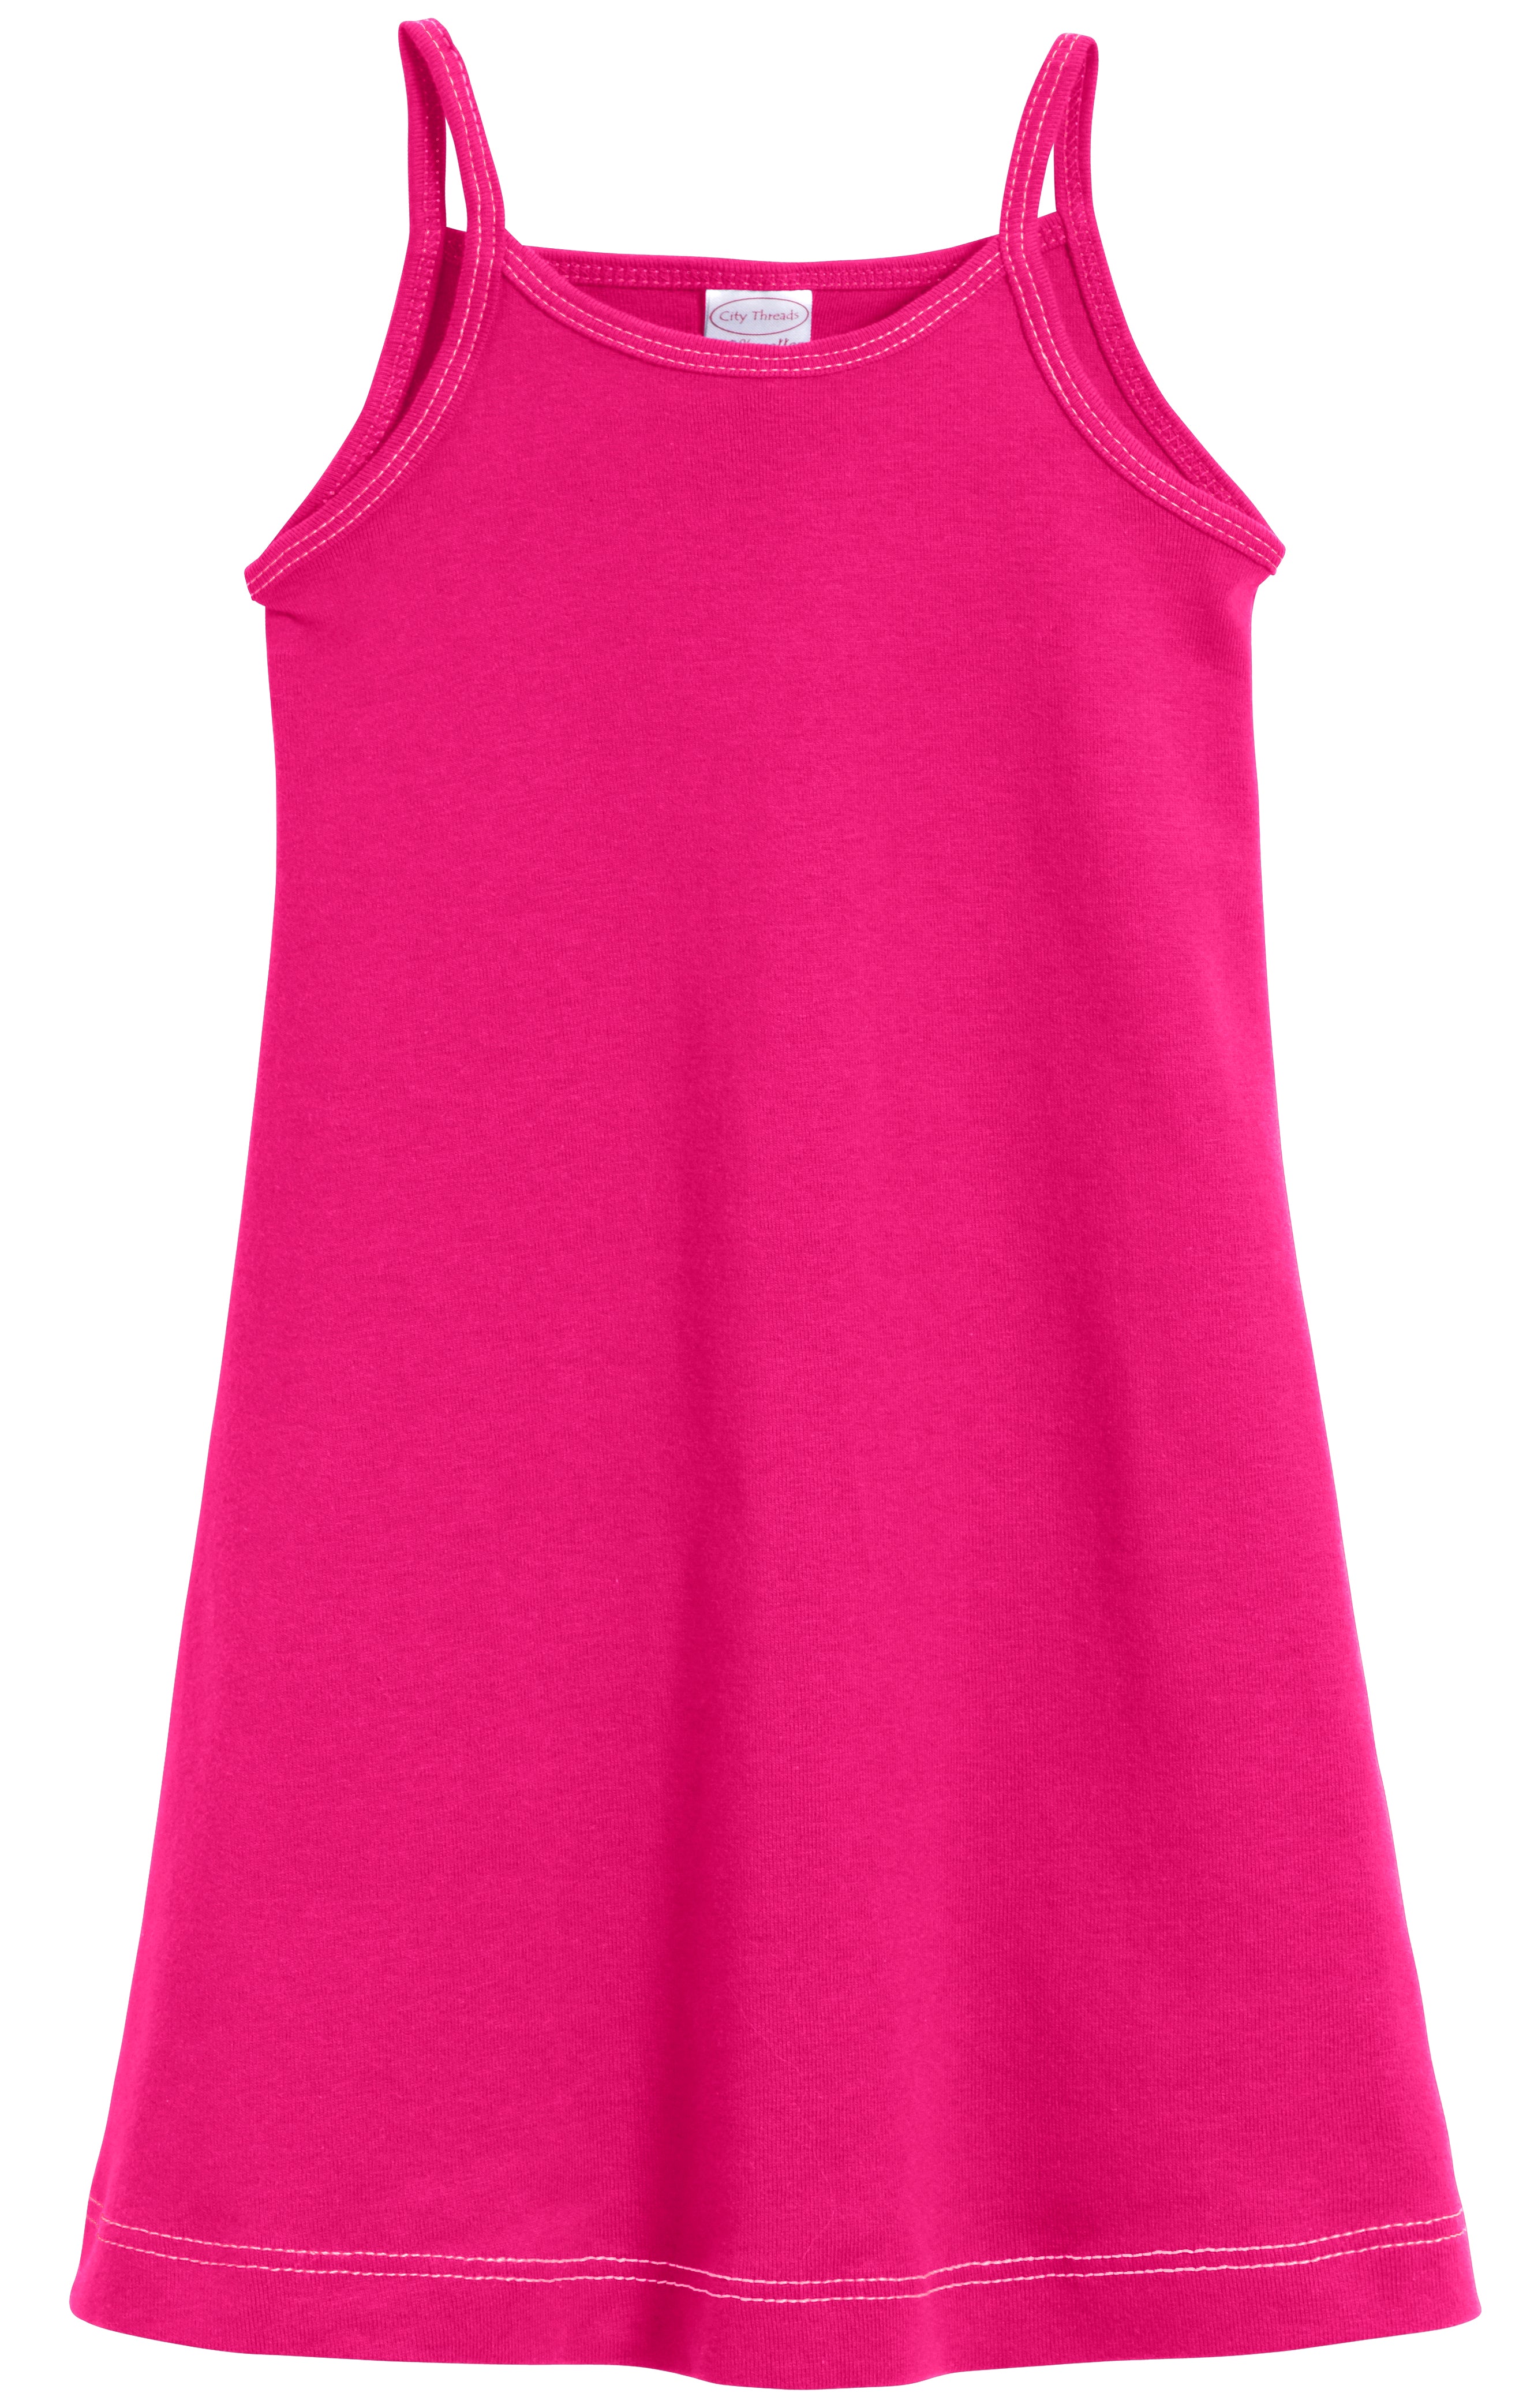 Hot pink tank top outfit summer casual fashion, V Neck Knitted